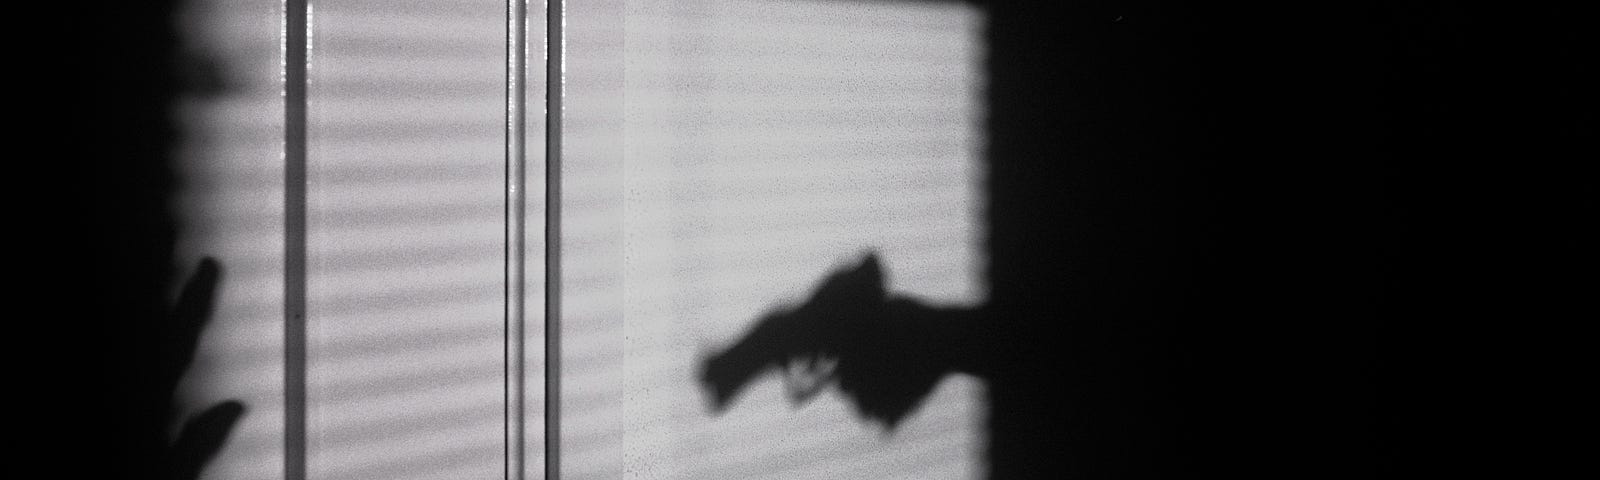 A black and white image of the shadows of two persons. One points a gun at the other, who has there hands raised.